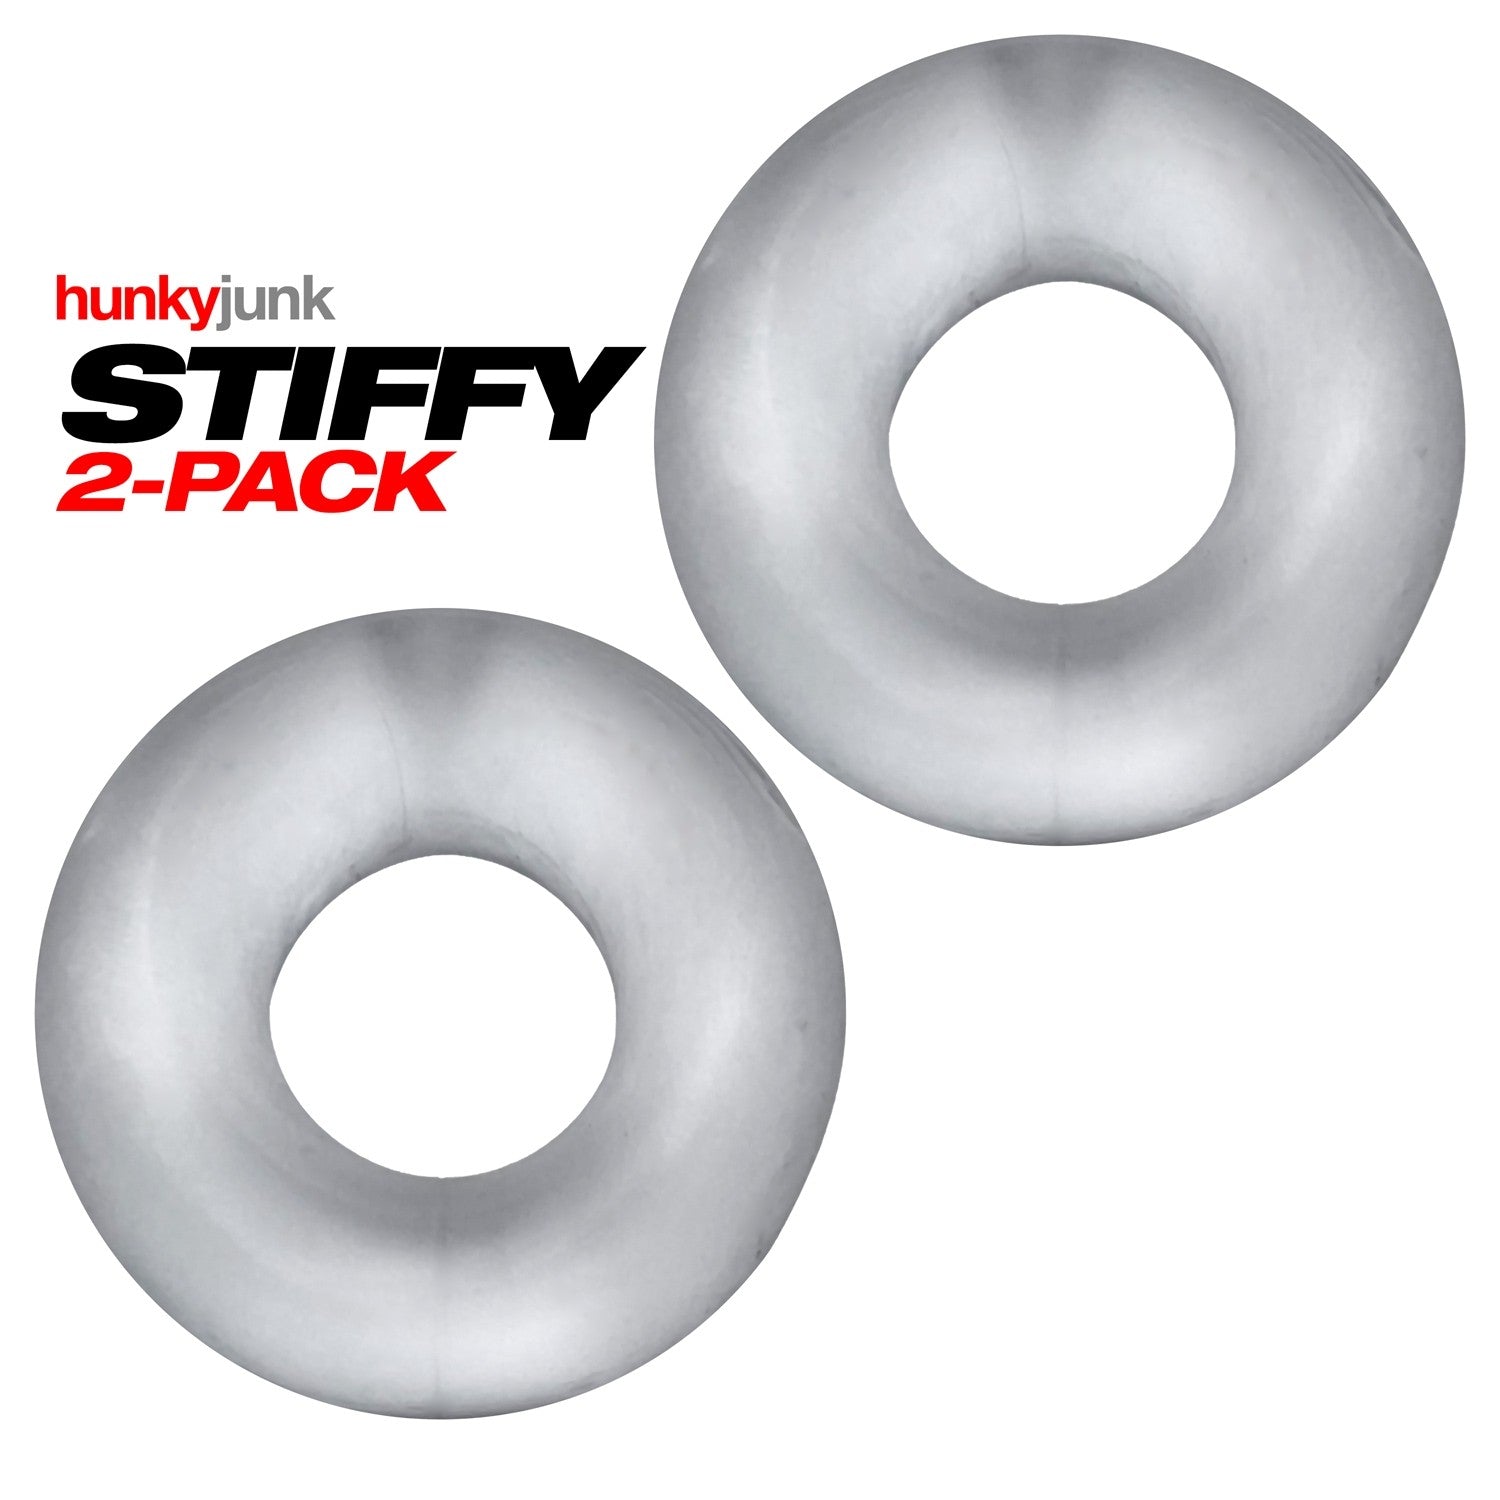 Hunkyjunk Stiffy Bulge Cock Ring Clear Ice 2 Pack - XOXTOYS